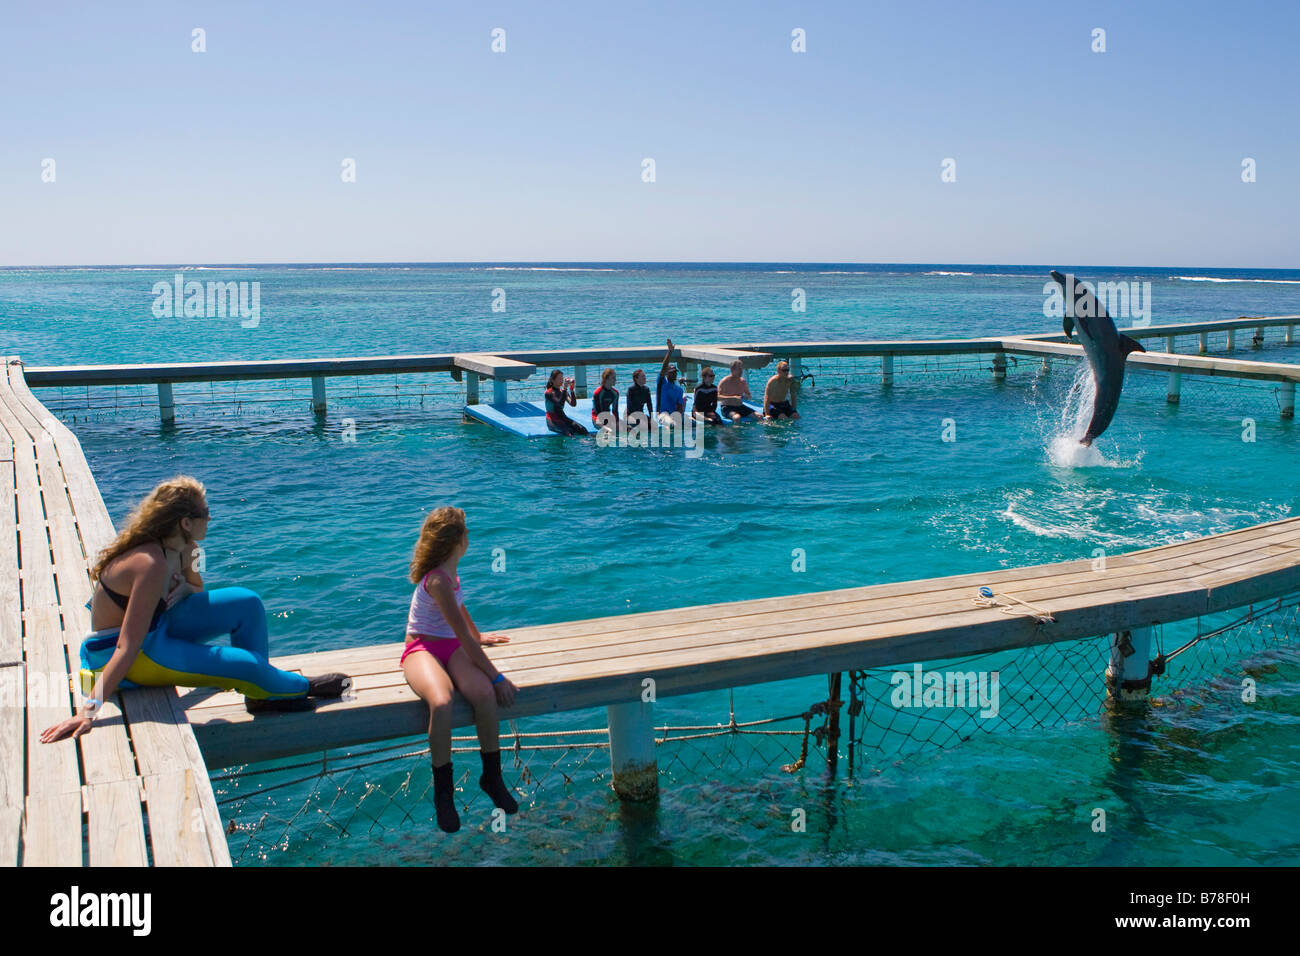 School children observing a dolphin during a biology lesson by a dolphin trainer, Anthony's Key Resort, Roatan, Honduras, Centr Stock Photo